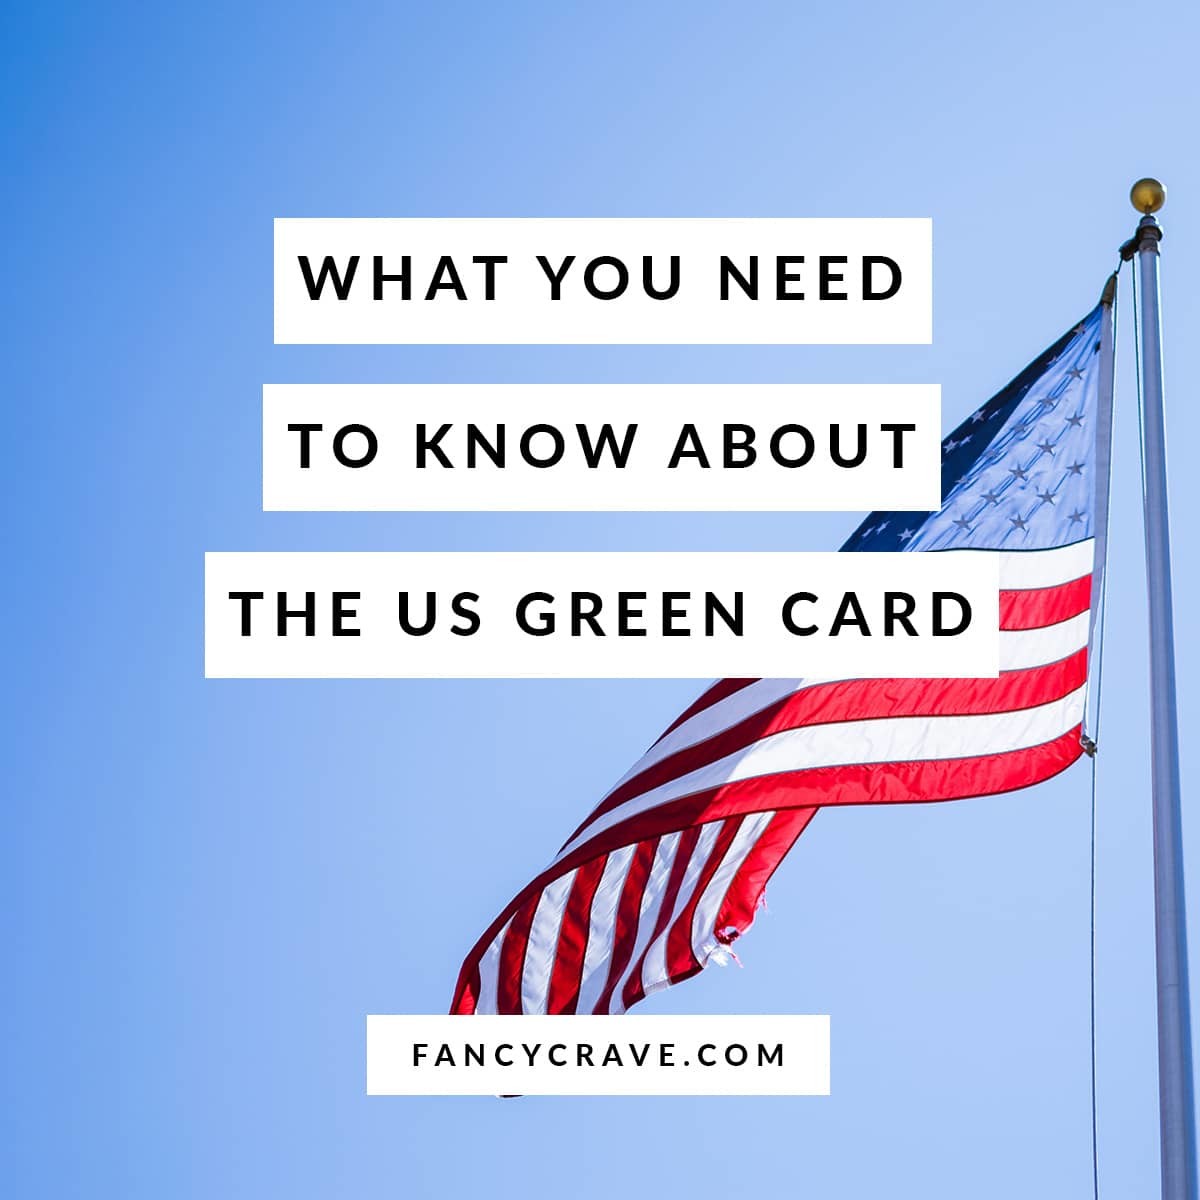 What You Need to Know About the US Green Card